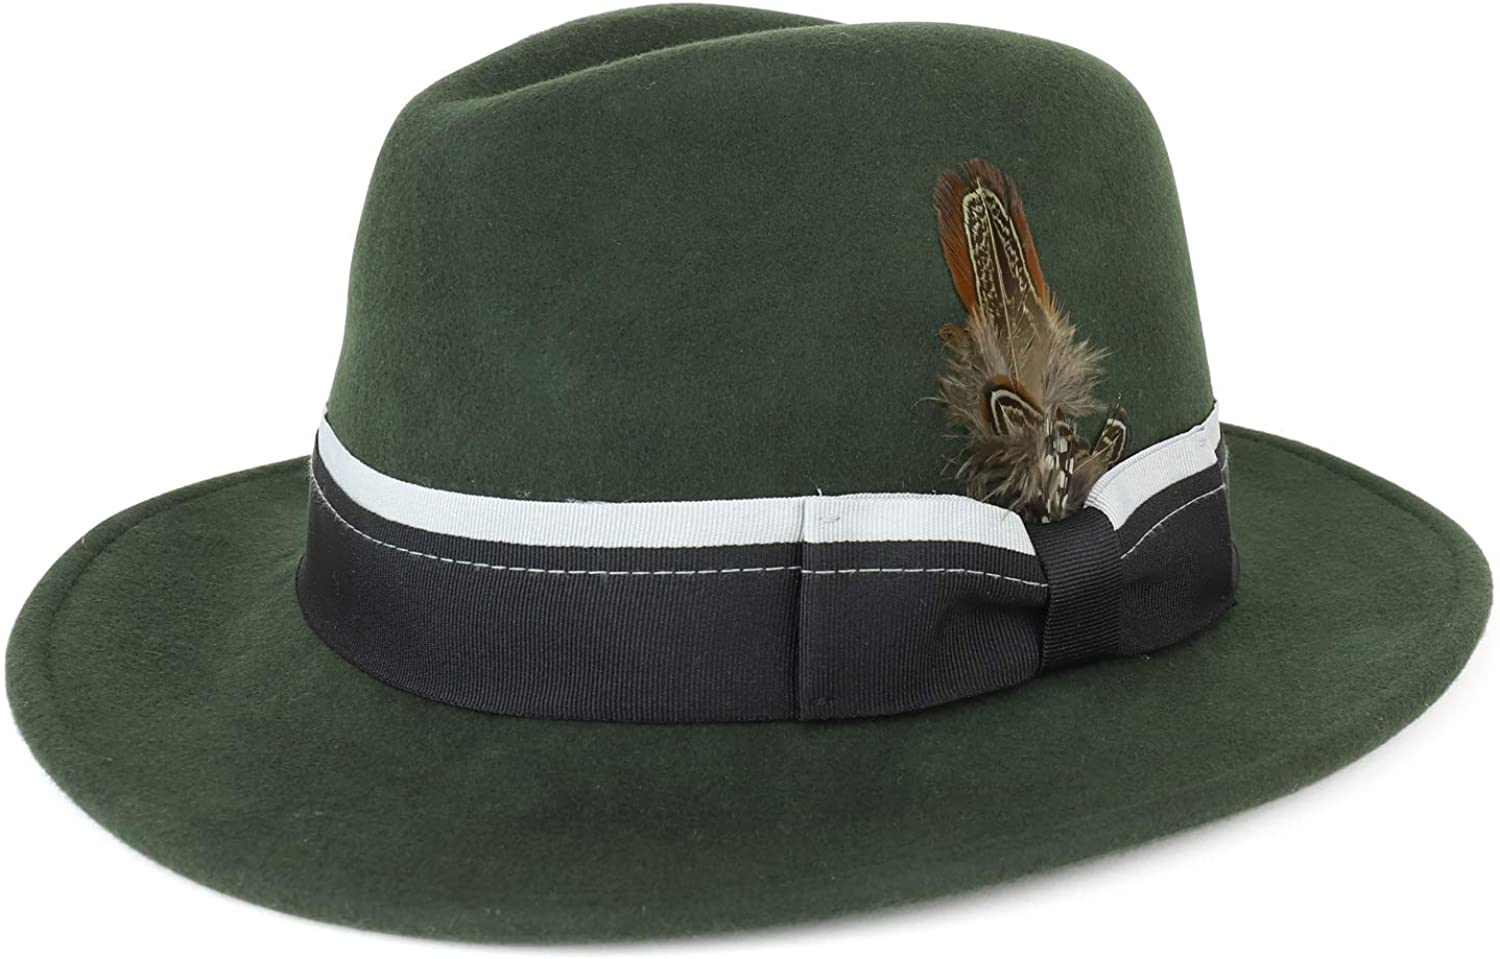 Armycrew XXL Oversize Wide Brim Wool Felt Fedora with Feather Dual Color Hatband